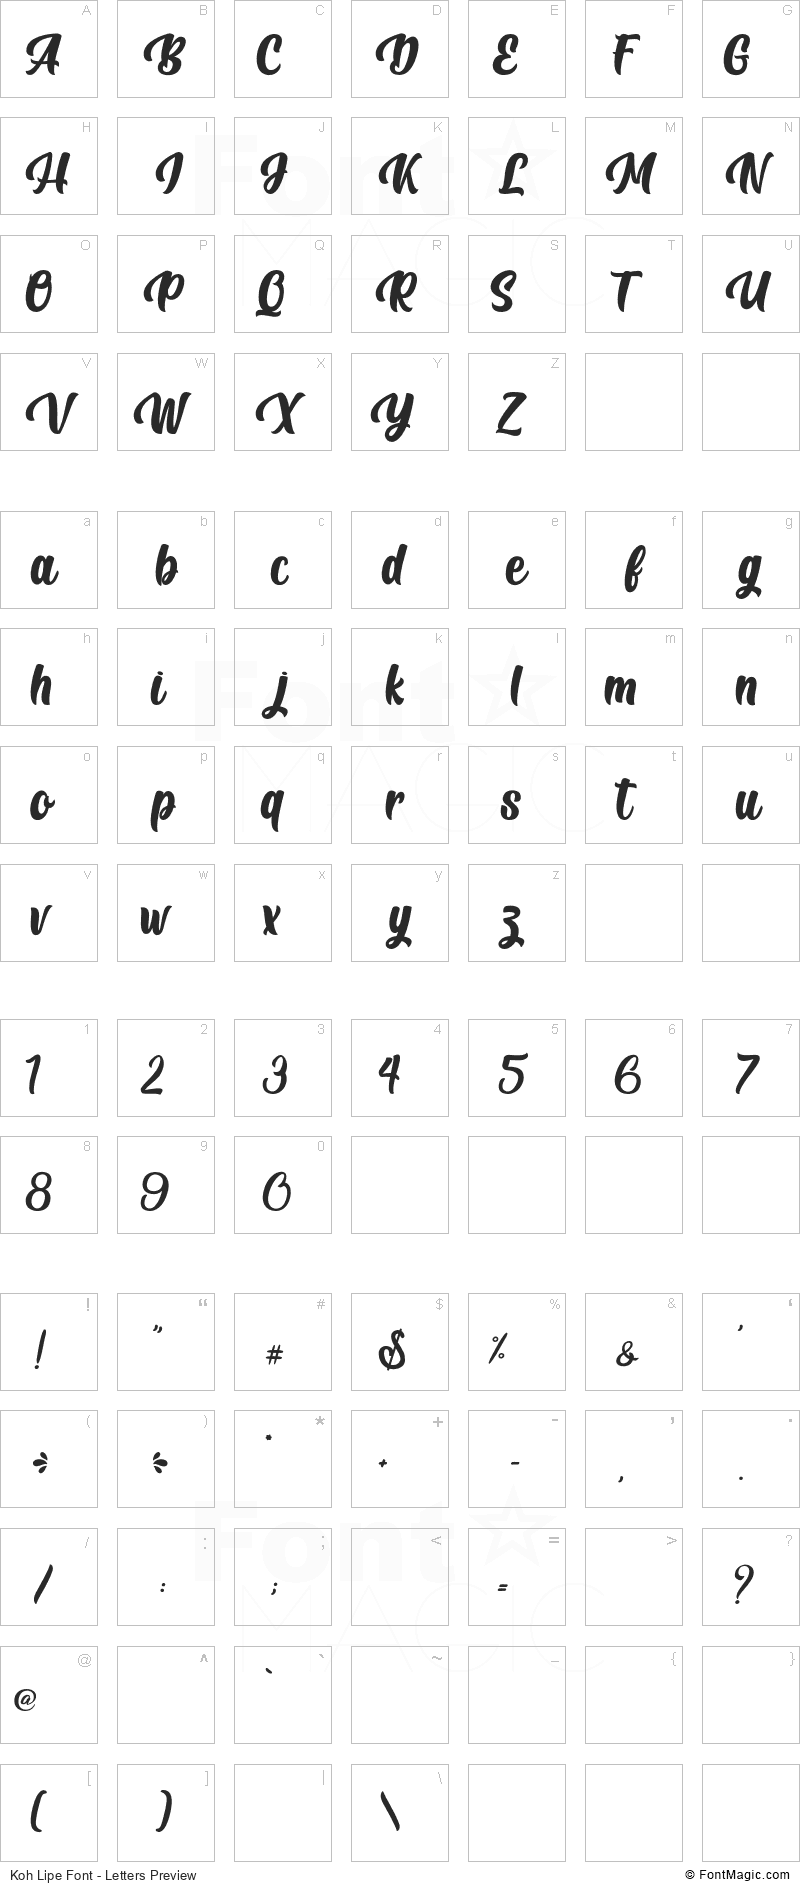 Koh Lipe Font - All Latters Preview Chart